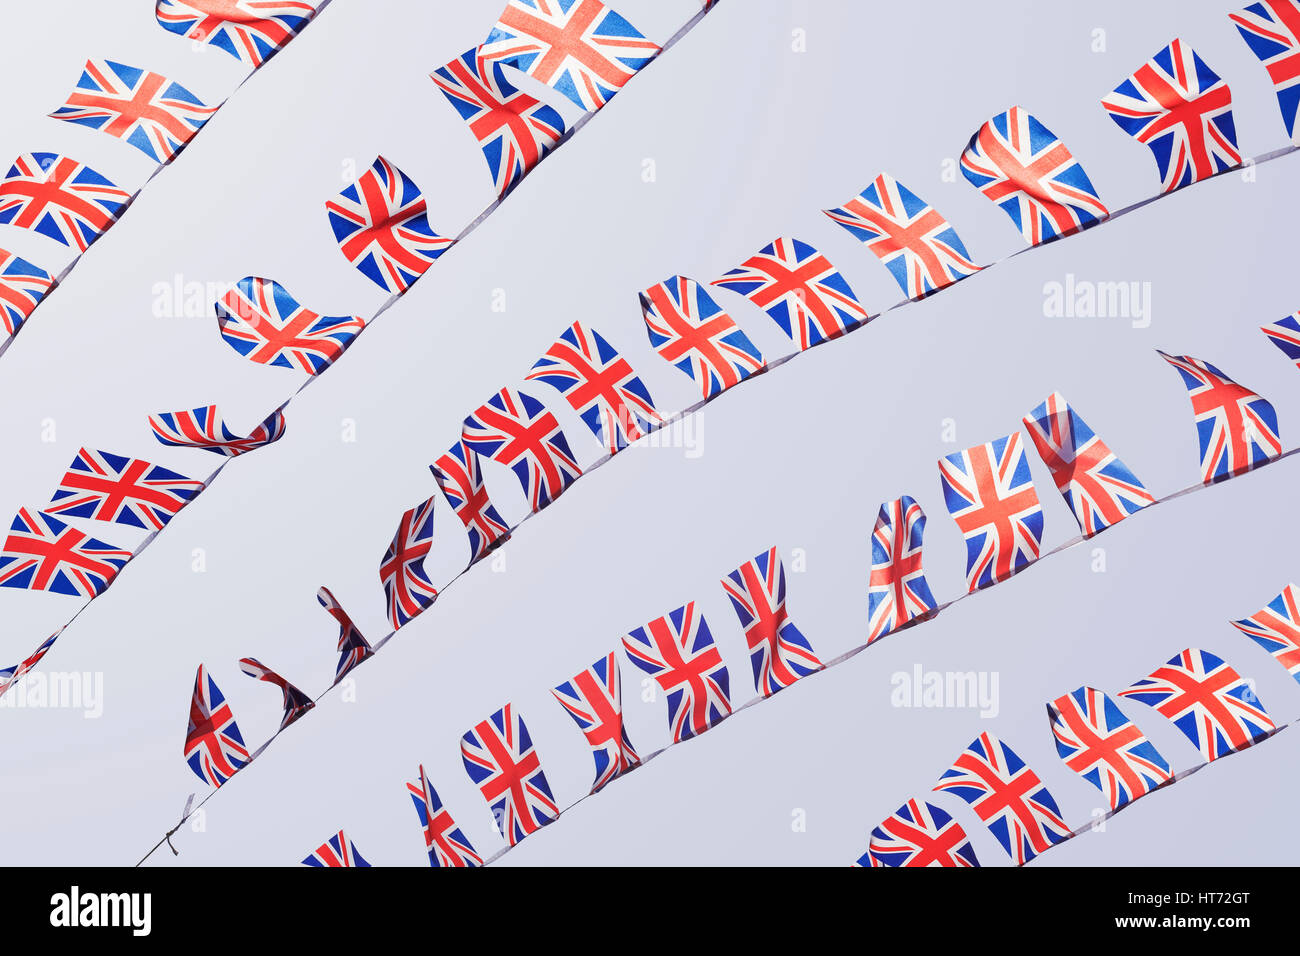 UK Union flag bunting flapping in the wind Stock Photo